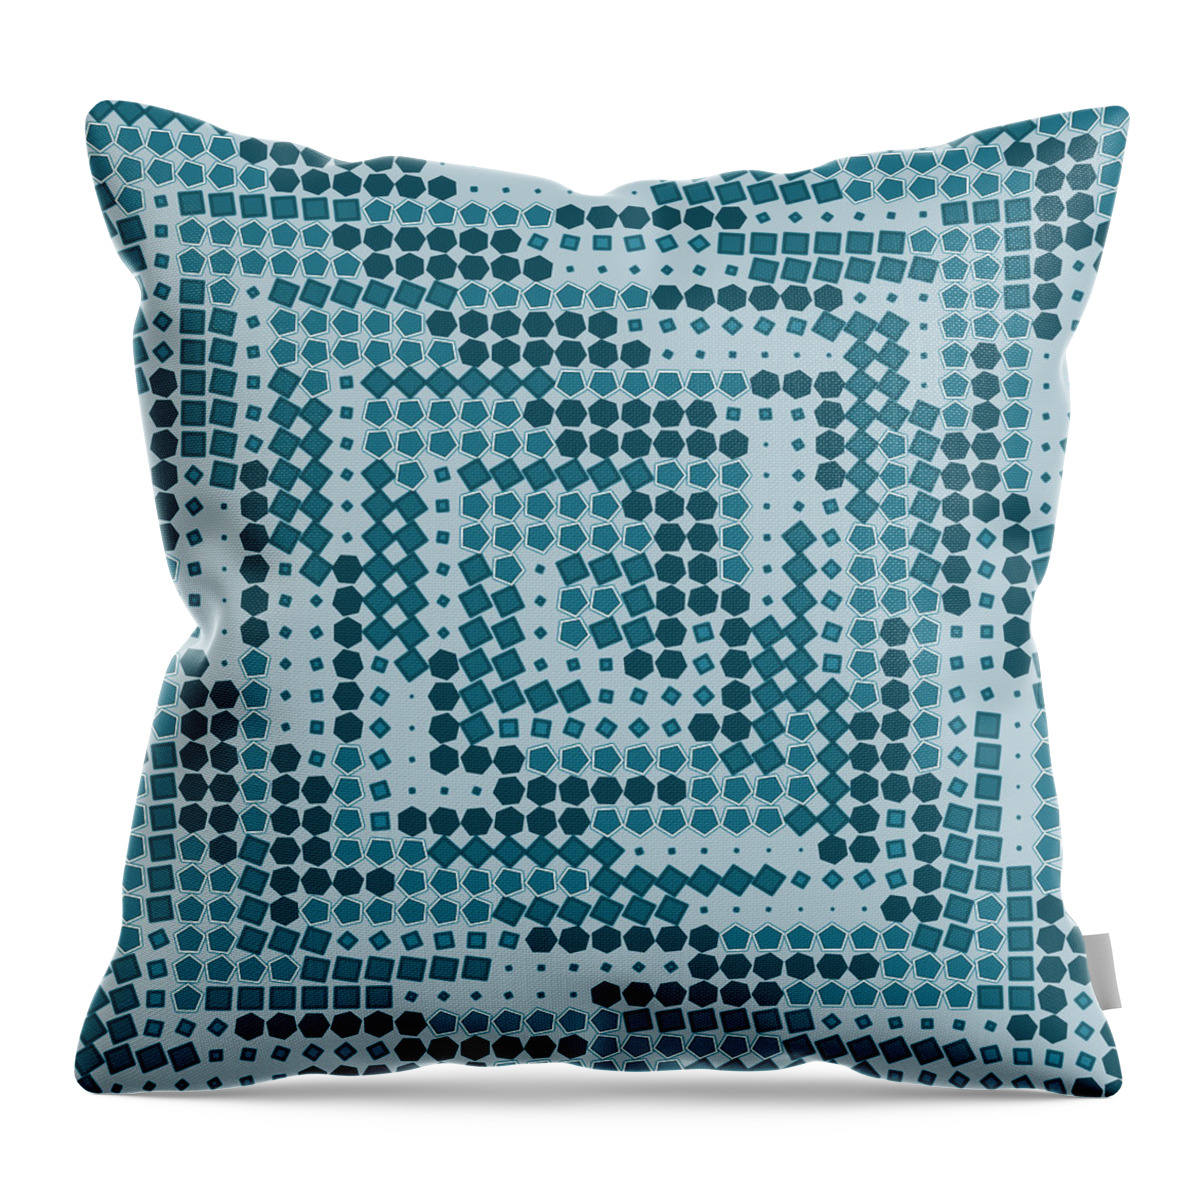 Abstract Throw Pillow featuring the digital art Pattern 9 by Marko Sabotin